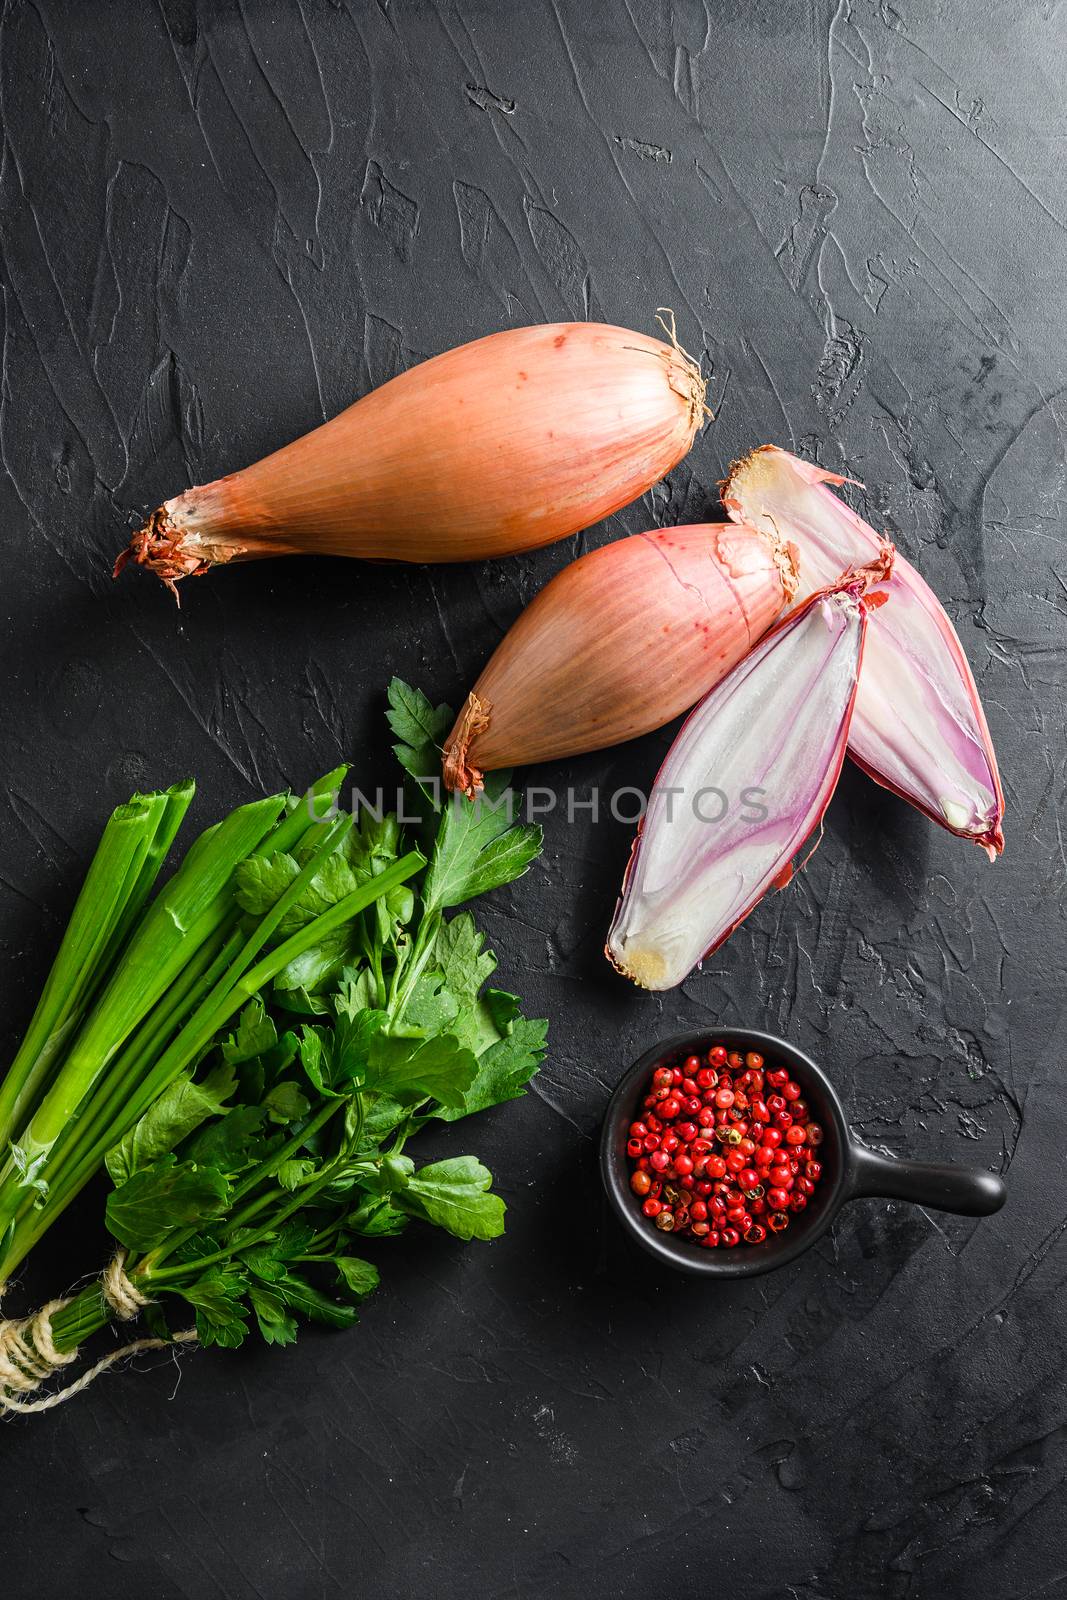 Shallot, eschalot or scallion raw ripe onions with greens and rose peppercorns sliced and halved black concrete textured background top view vertical by Ilianesolenyi